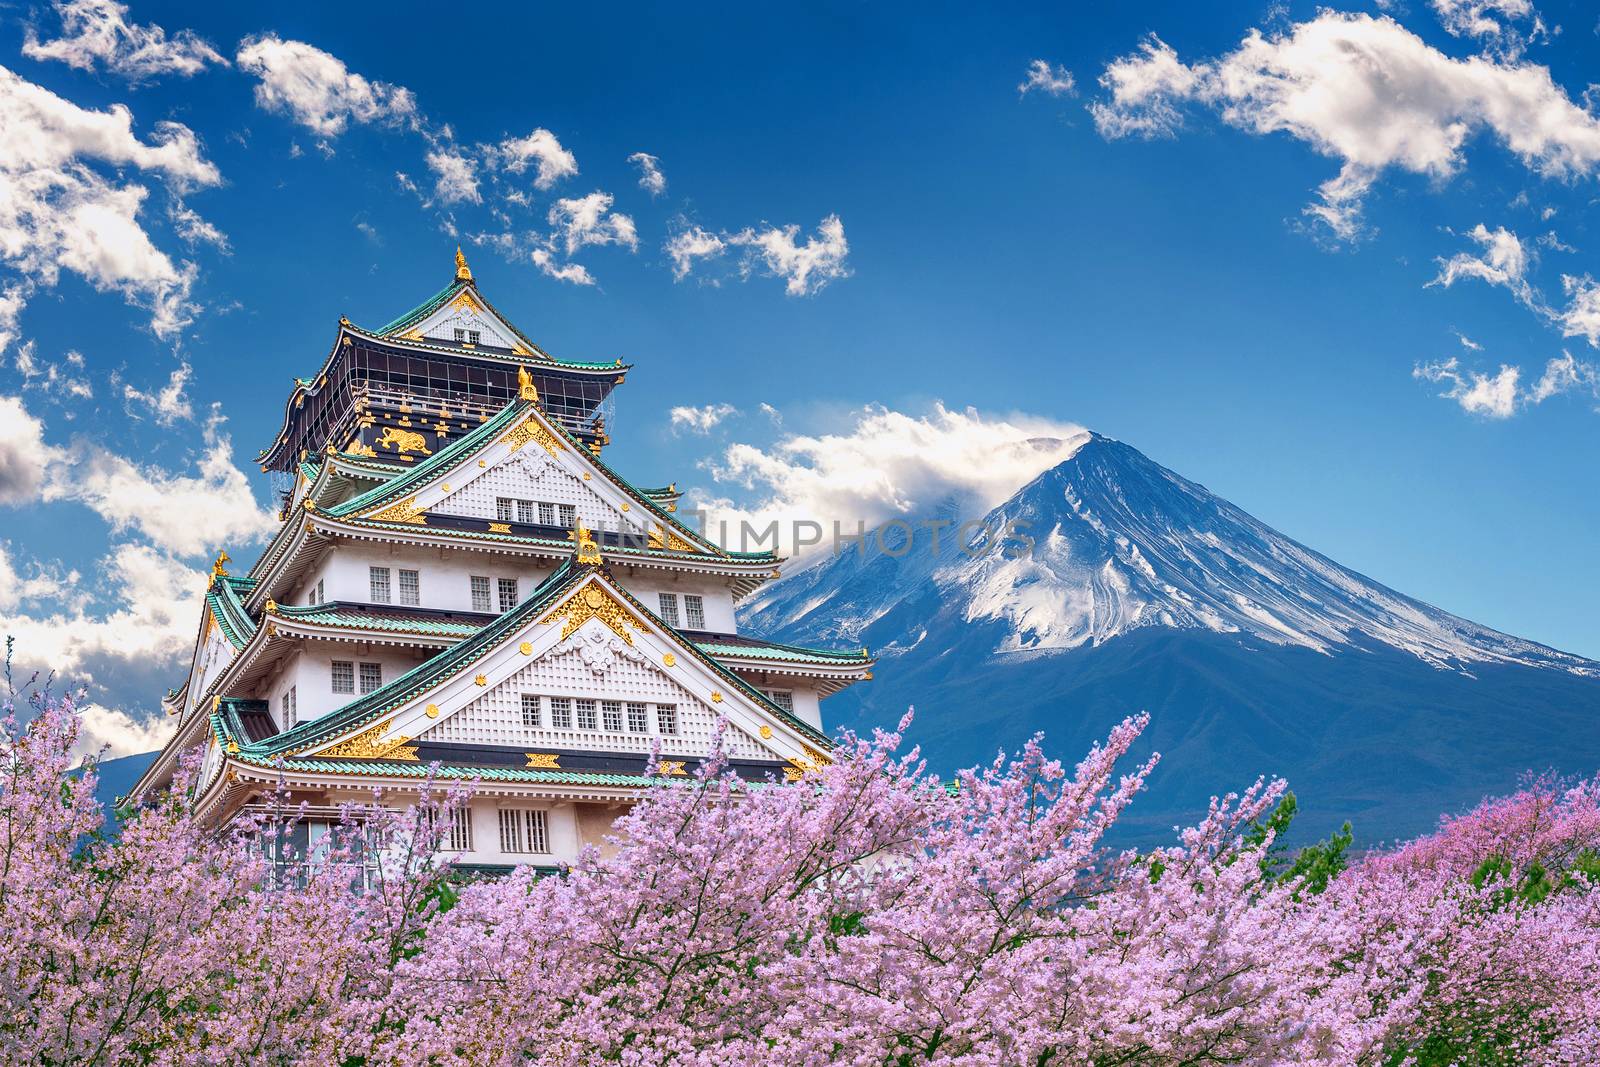 Fuji mountains and castle with cherry blossom in spring. by gutarphotoghaphy